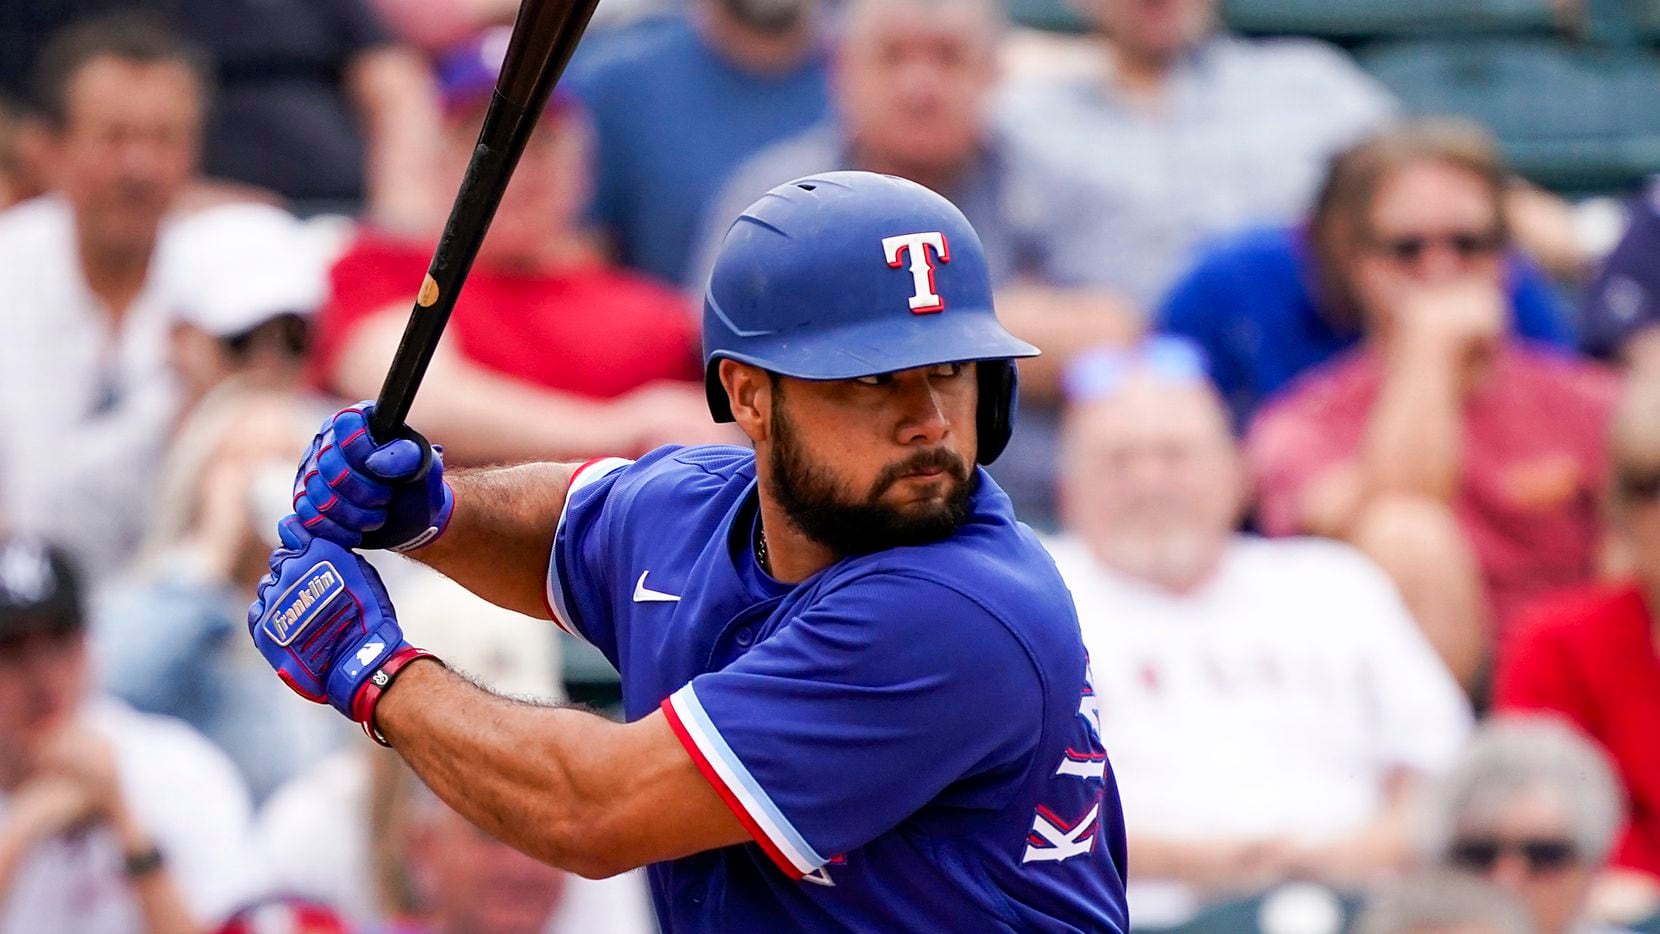 Texas Rangers infielder Isiah Kiner-Falefa bats during a spring training game against the Los Angeles Angels at Tempe Diablo Stadium on Friday, Feb. 28, 2020, in Tempe, Ariz.